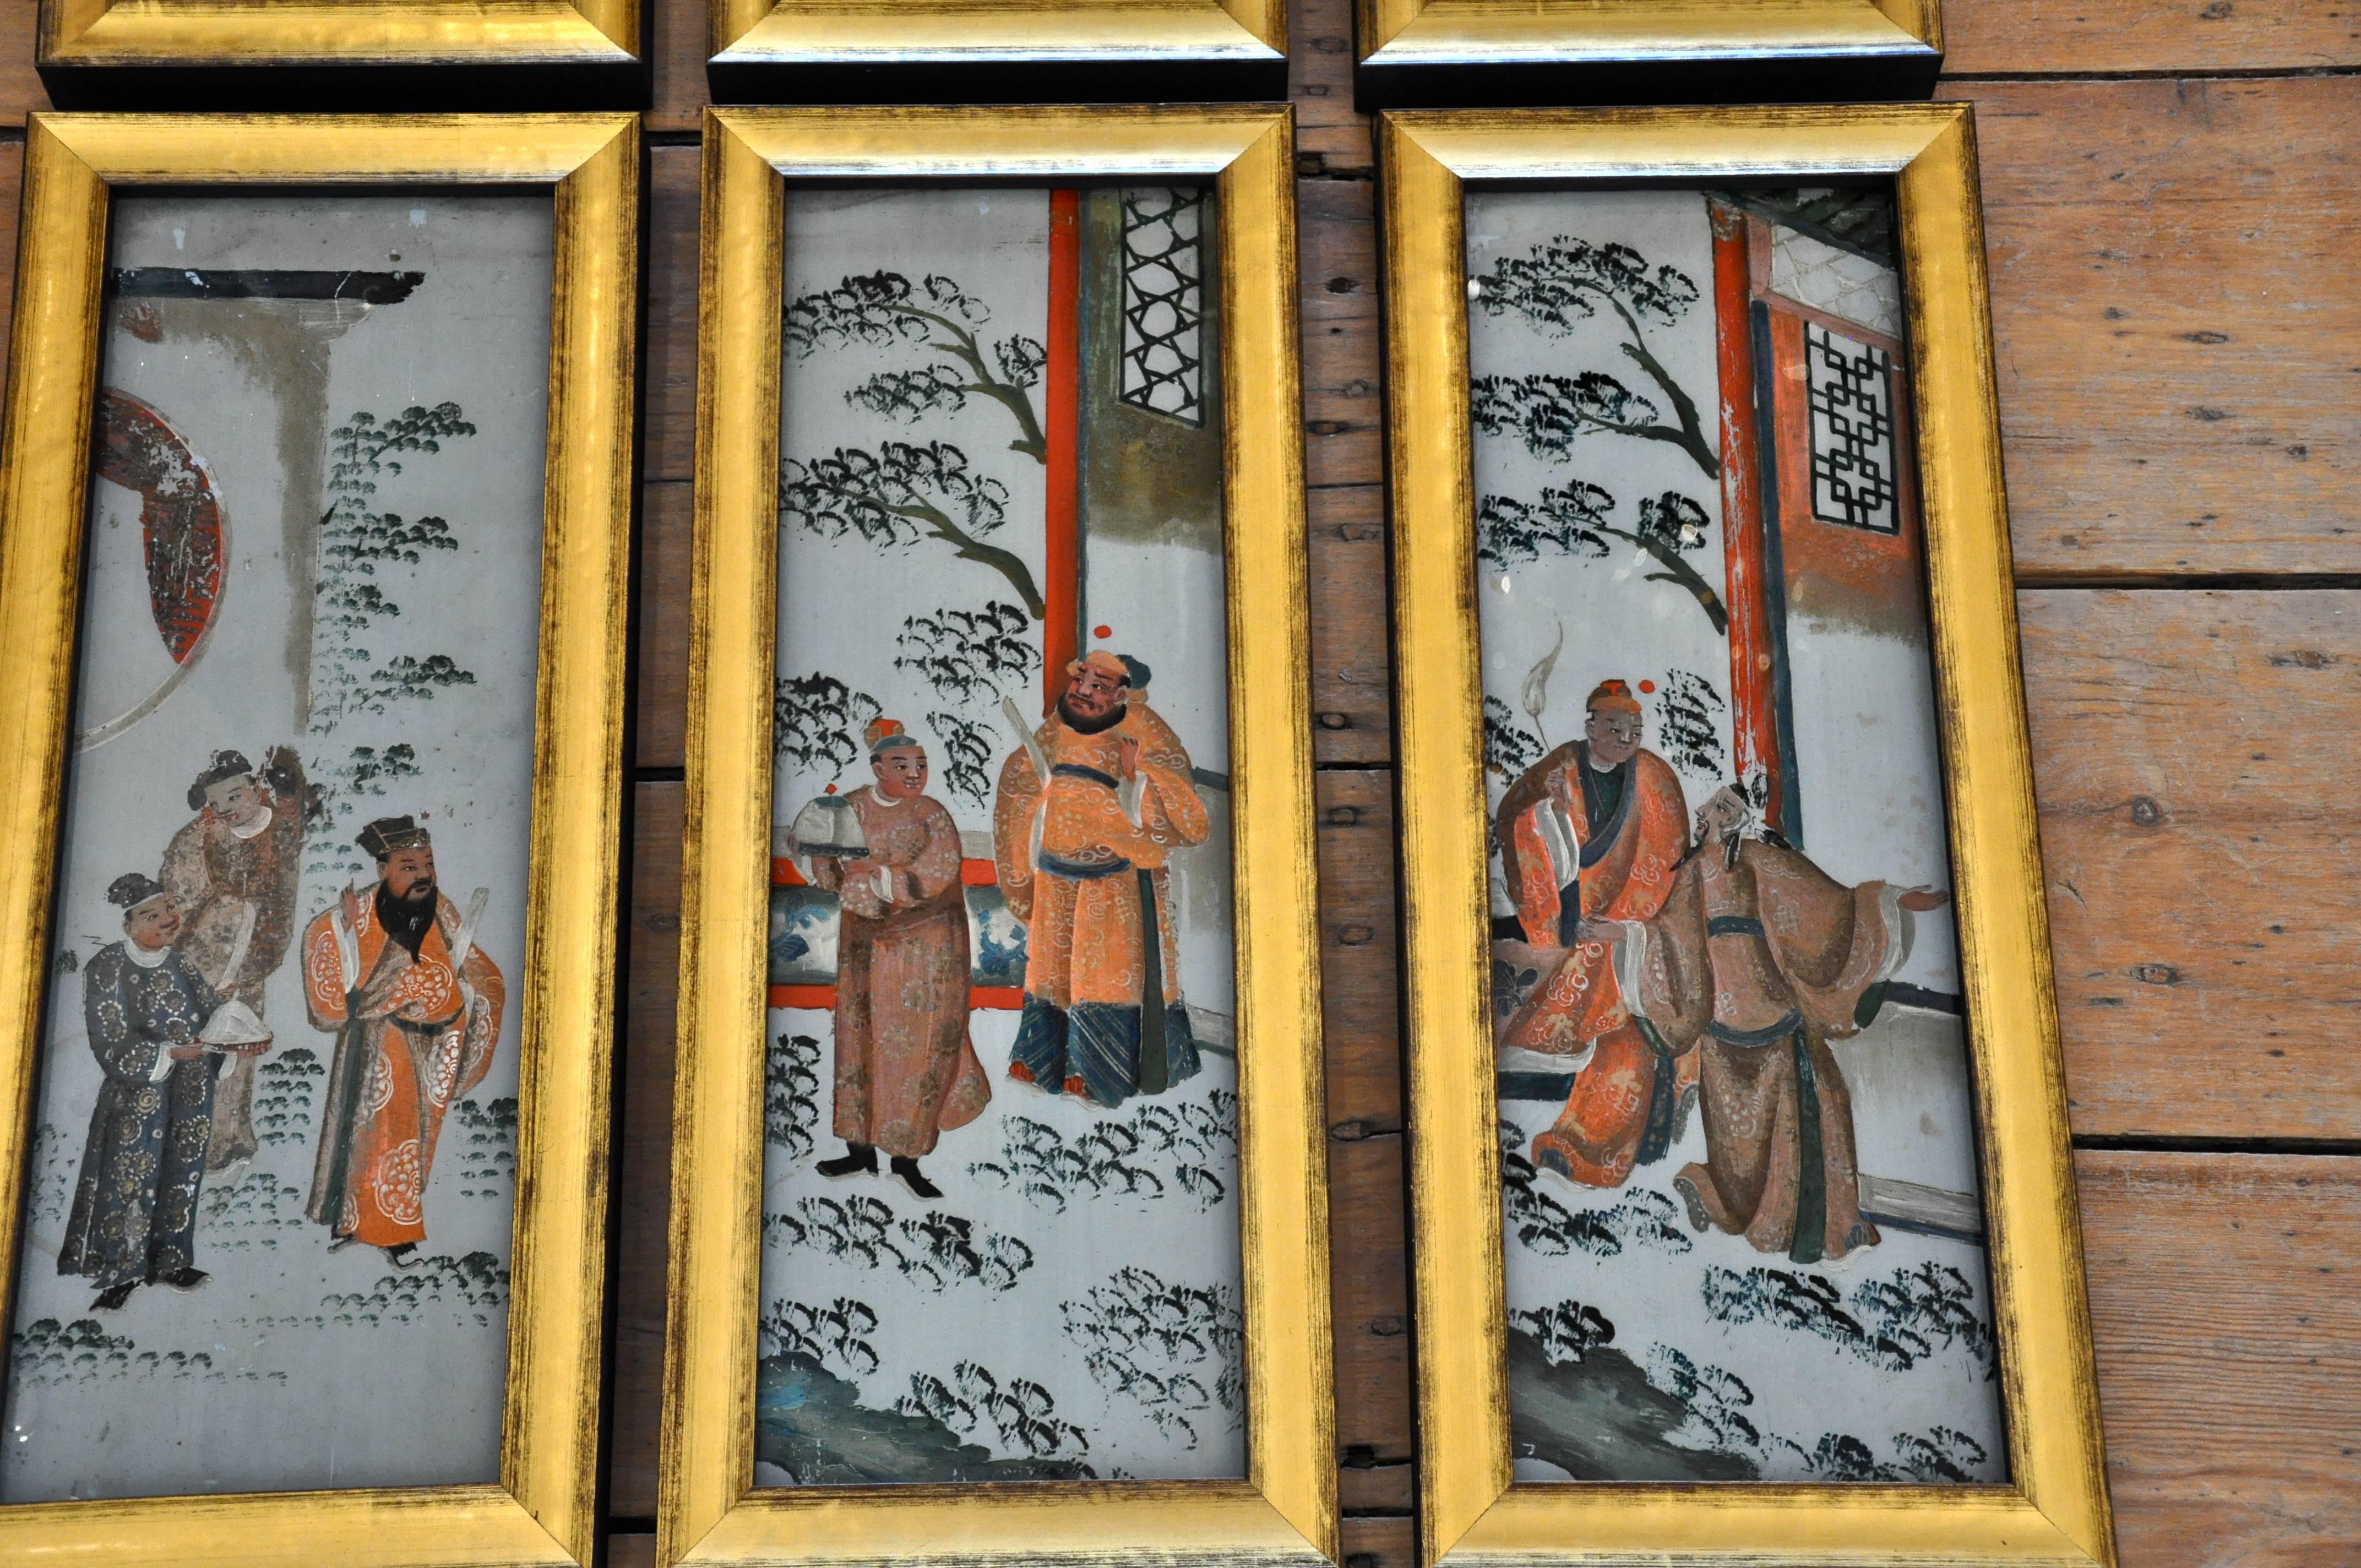 Set of six Chinese reverse painting on glass from the Early 20th century.

Showing Chinese court life.
Wonderful hand work, slightly naive.
Beautiful salmon and teal colors.
Mounted in custom gilt frames.